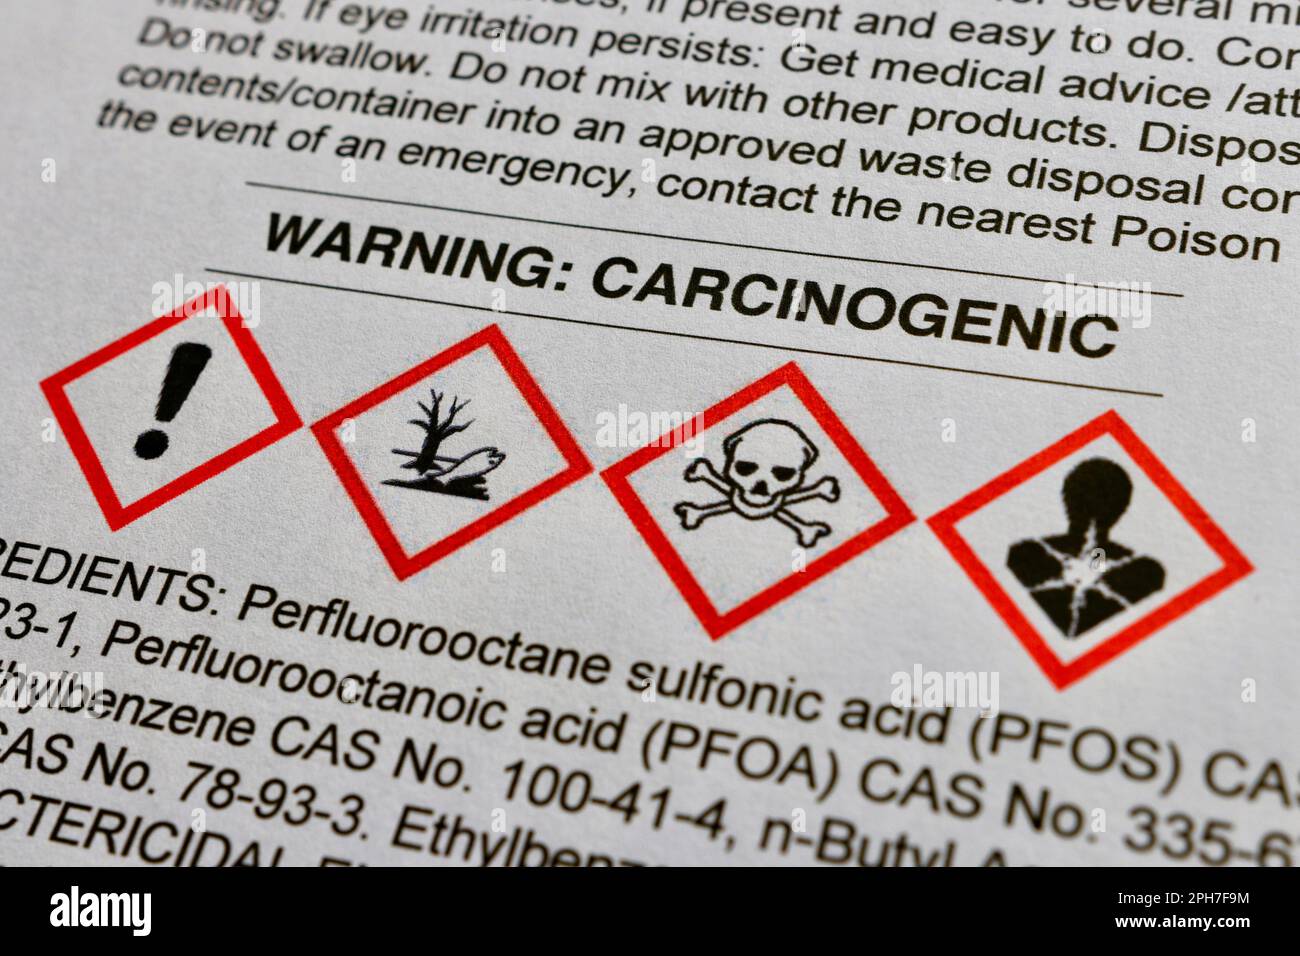 Warning on a Safety Data Sheet indicating that the product contains carcinogenic substances. Standard chemical hazard pictograms are shown Stock Photo